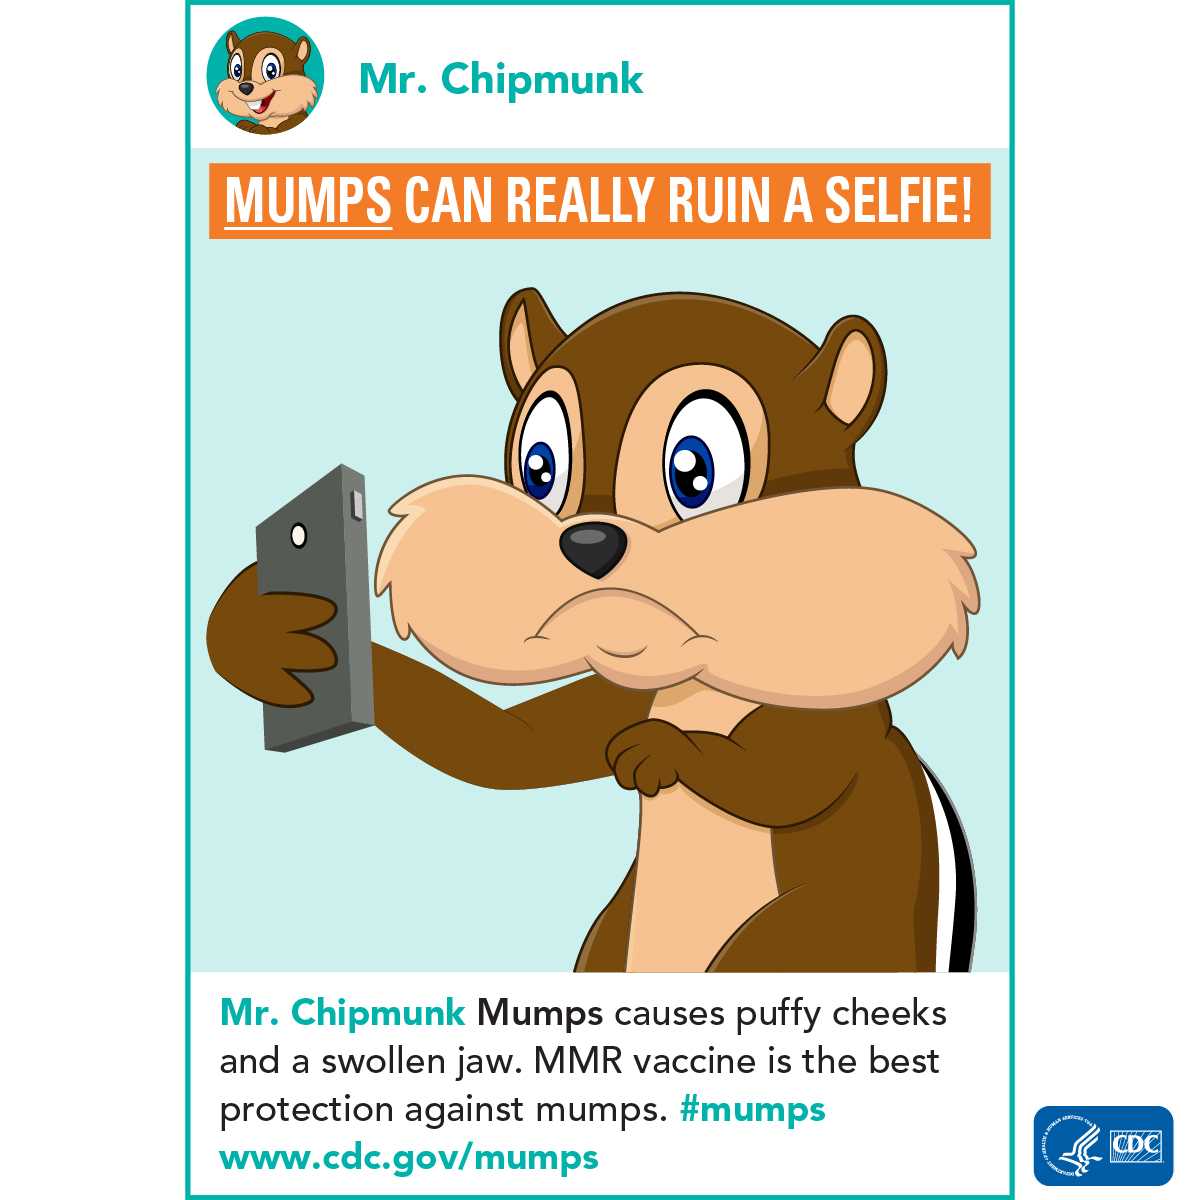 Mumps Can Really Ruin a Selfie infographic